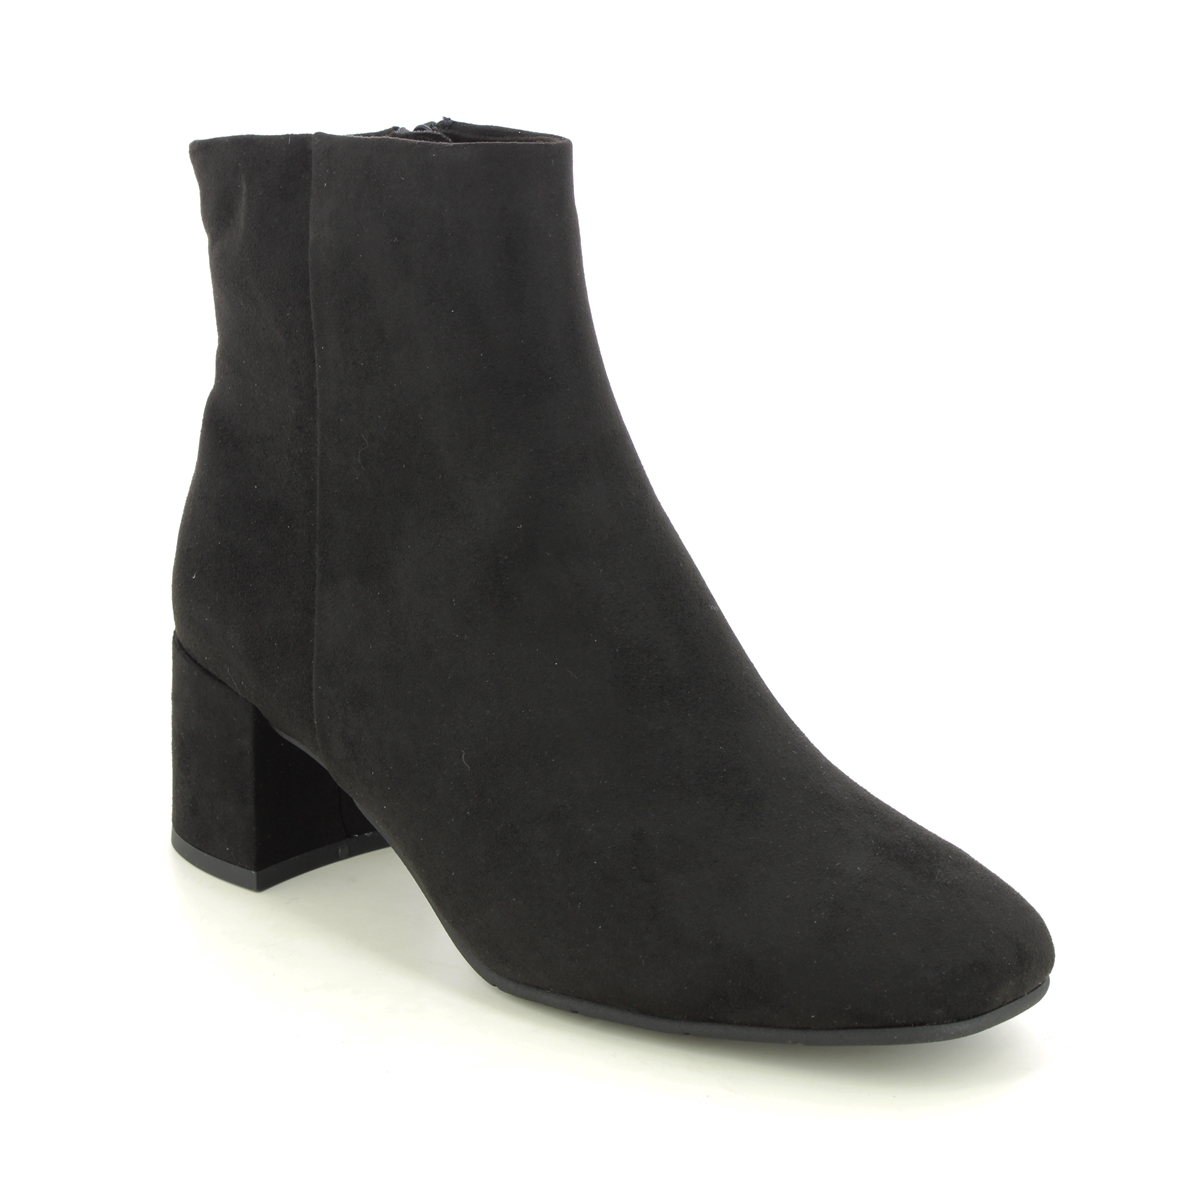 Marco Tozzi Vacco Black Womens Heeled Boots 25349-41-001 In Size 38 In Plain Black